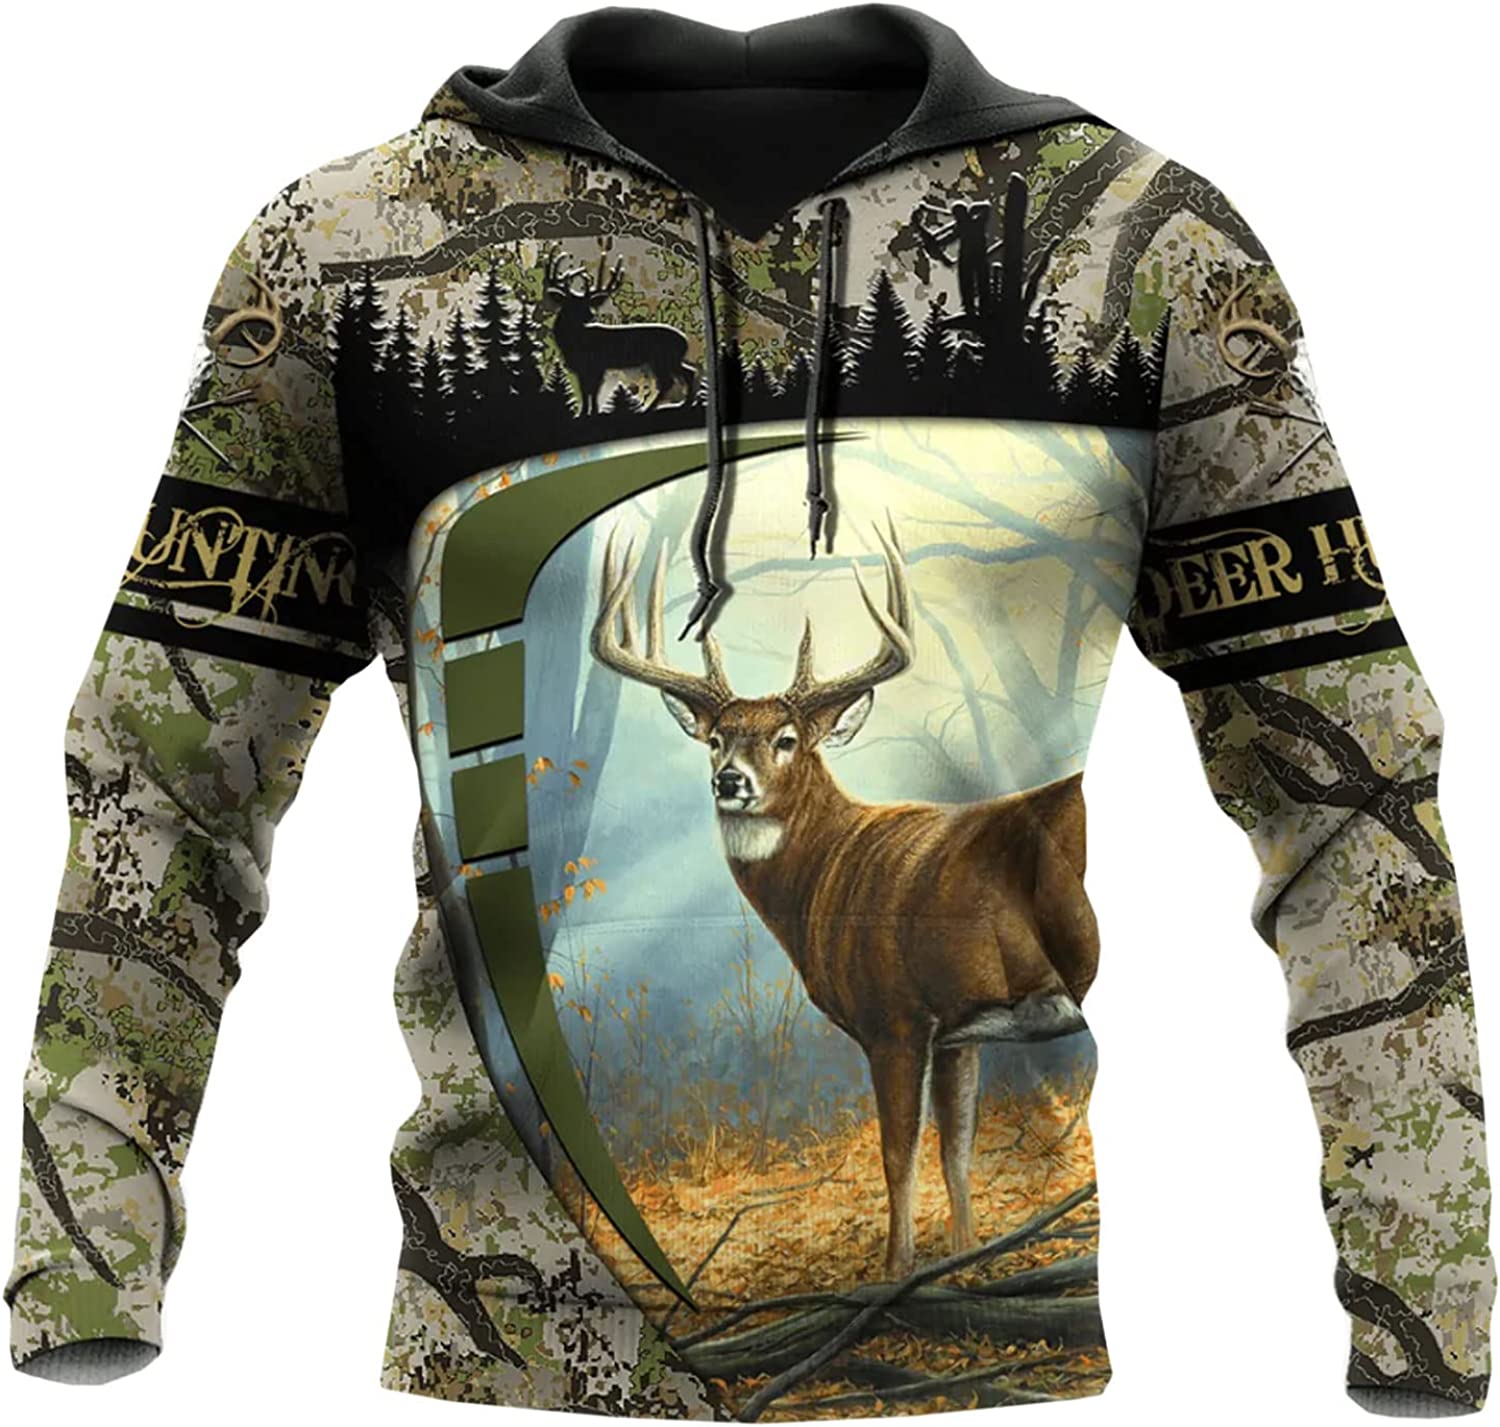 Get the Ultimate 3D Full Print Deer Hunting Experience with this Cool Animal Hunting Shirt – Perfect for Deer Hunter Lovers and as a Gift for the Whole Family! – JOT1500